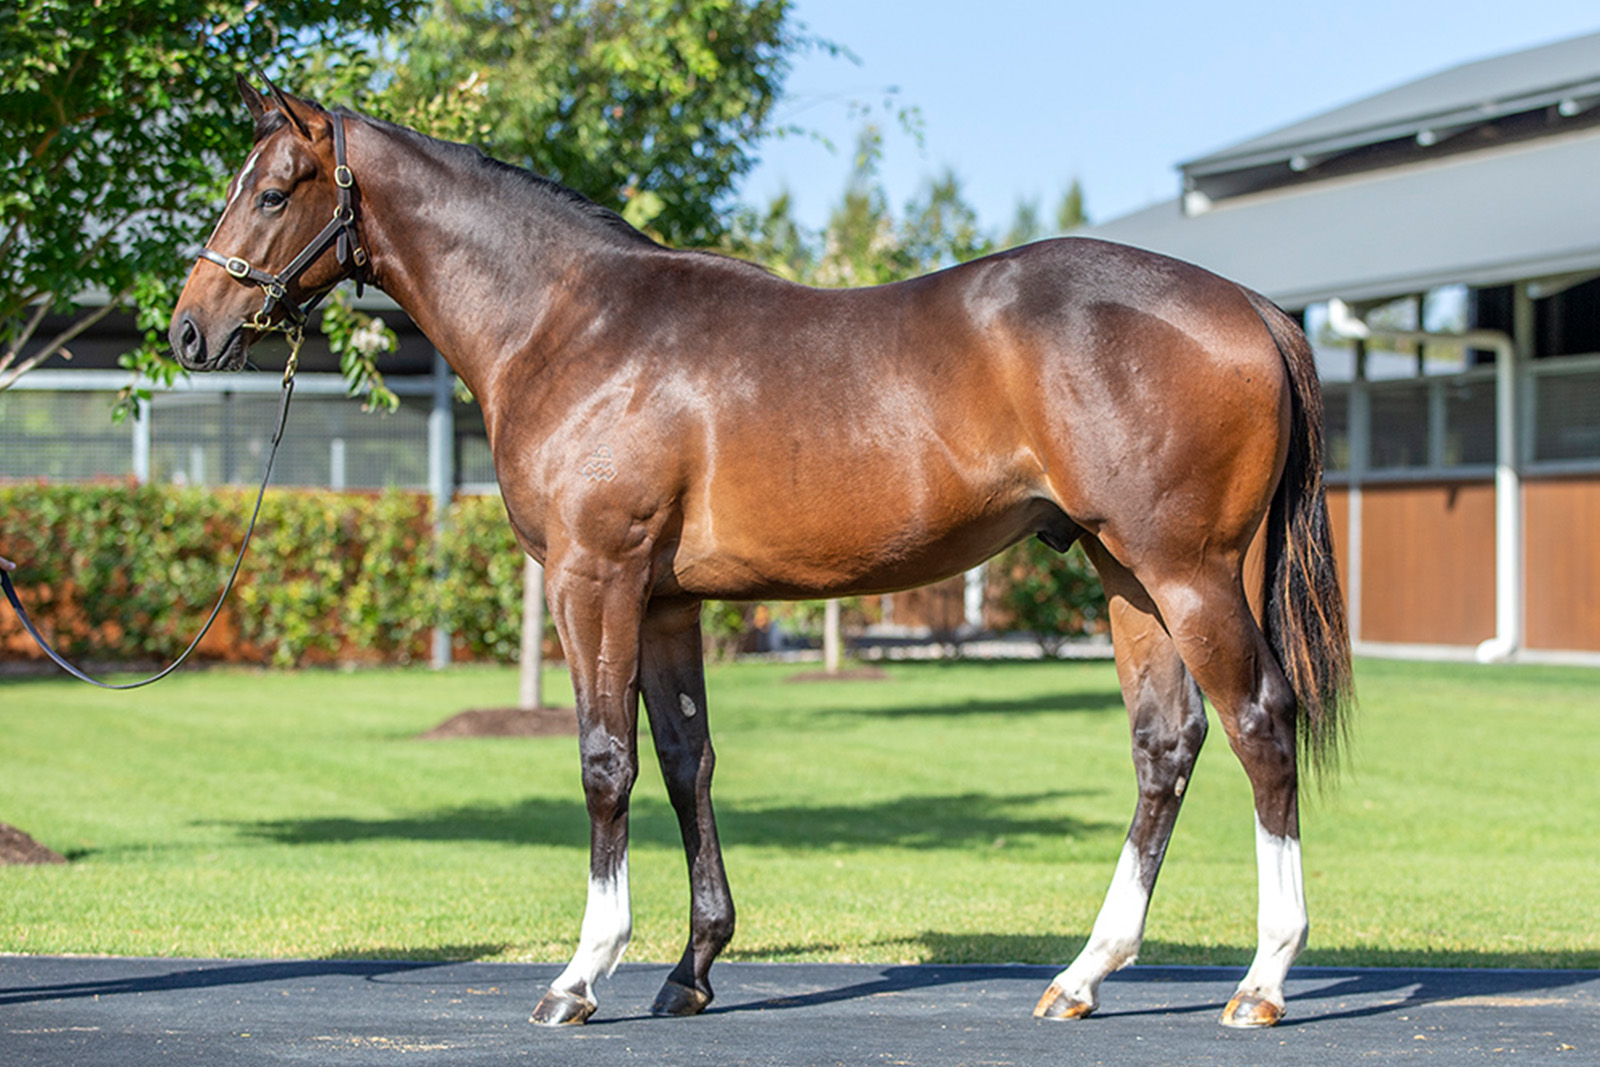 Lot 432 ex Statuette (by Redoute's Choice) colt. Sold at Magic Millions 2023 for $360,000 to Portelli Racing